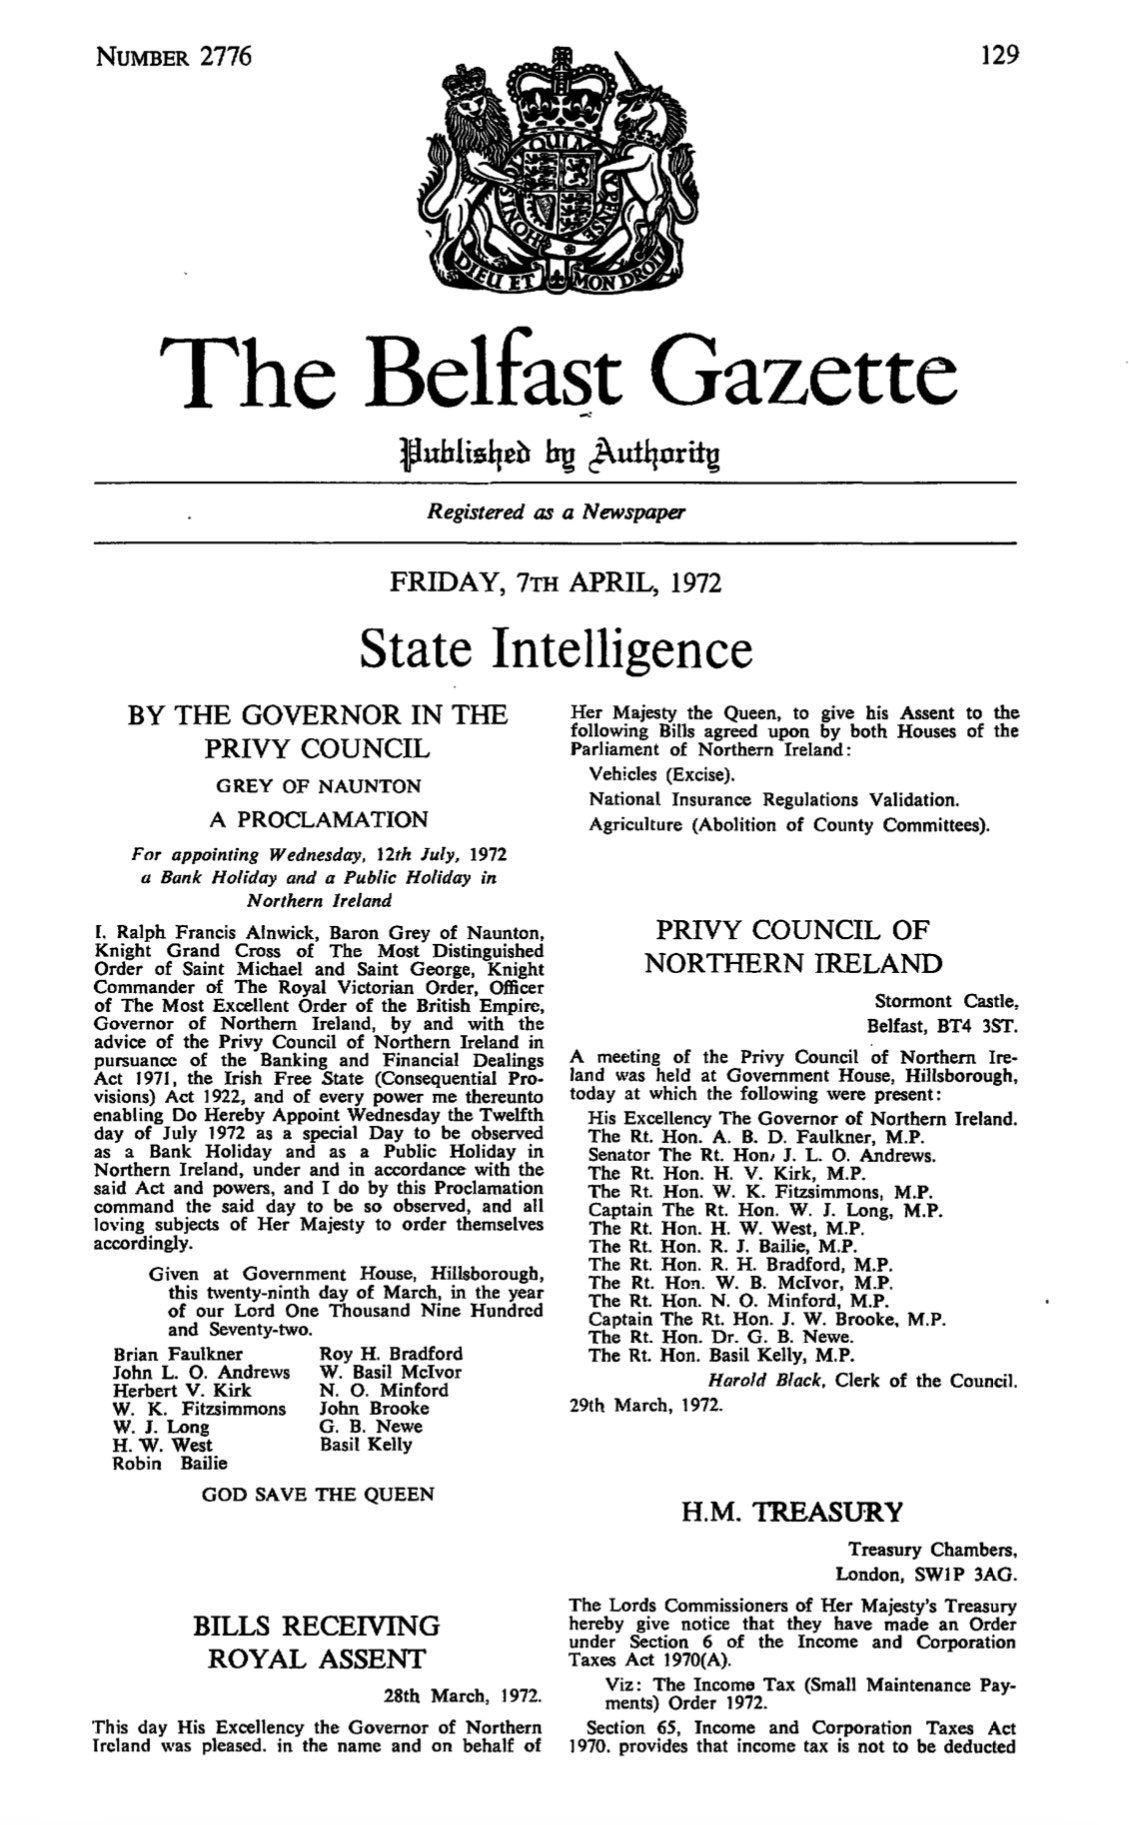 Page from the Belfast Gazette recording the final Privy Council of Northern Ireland meeting